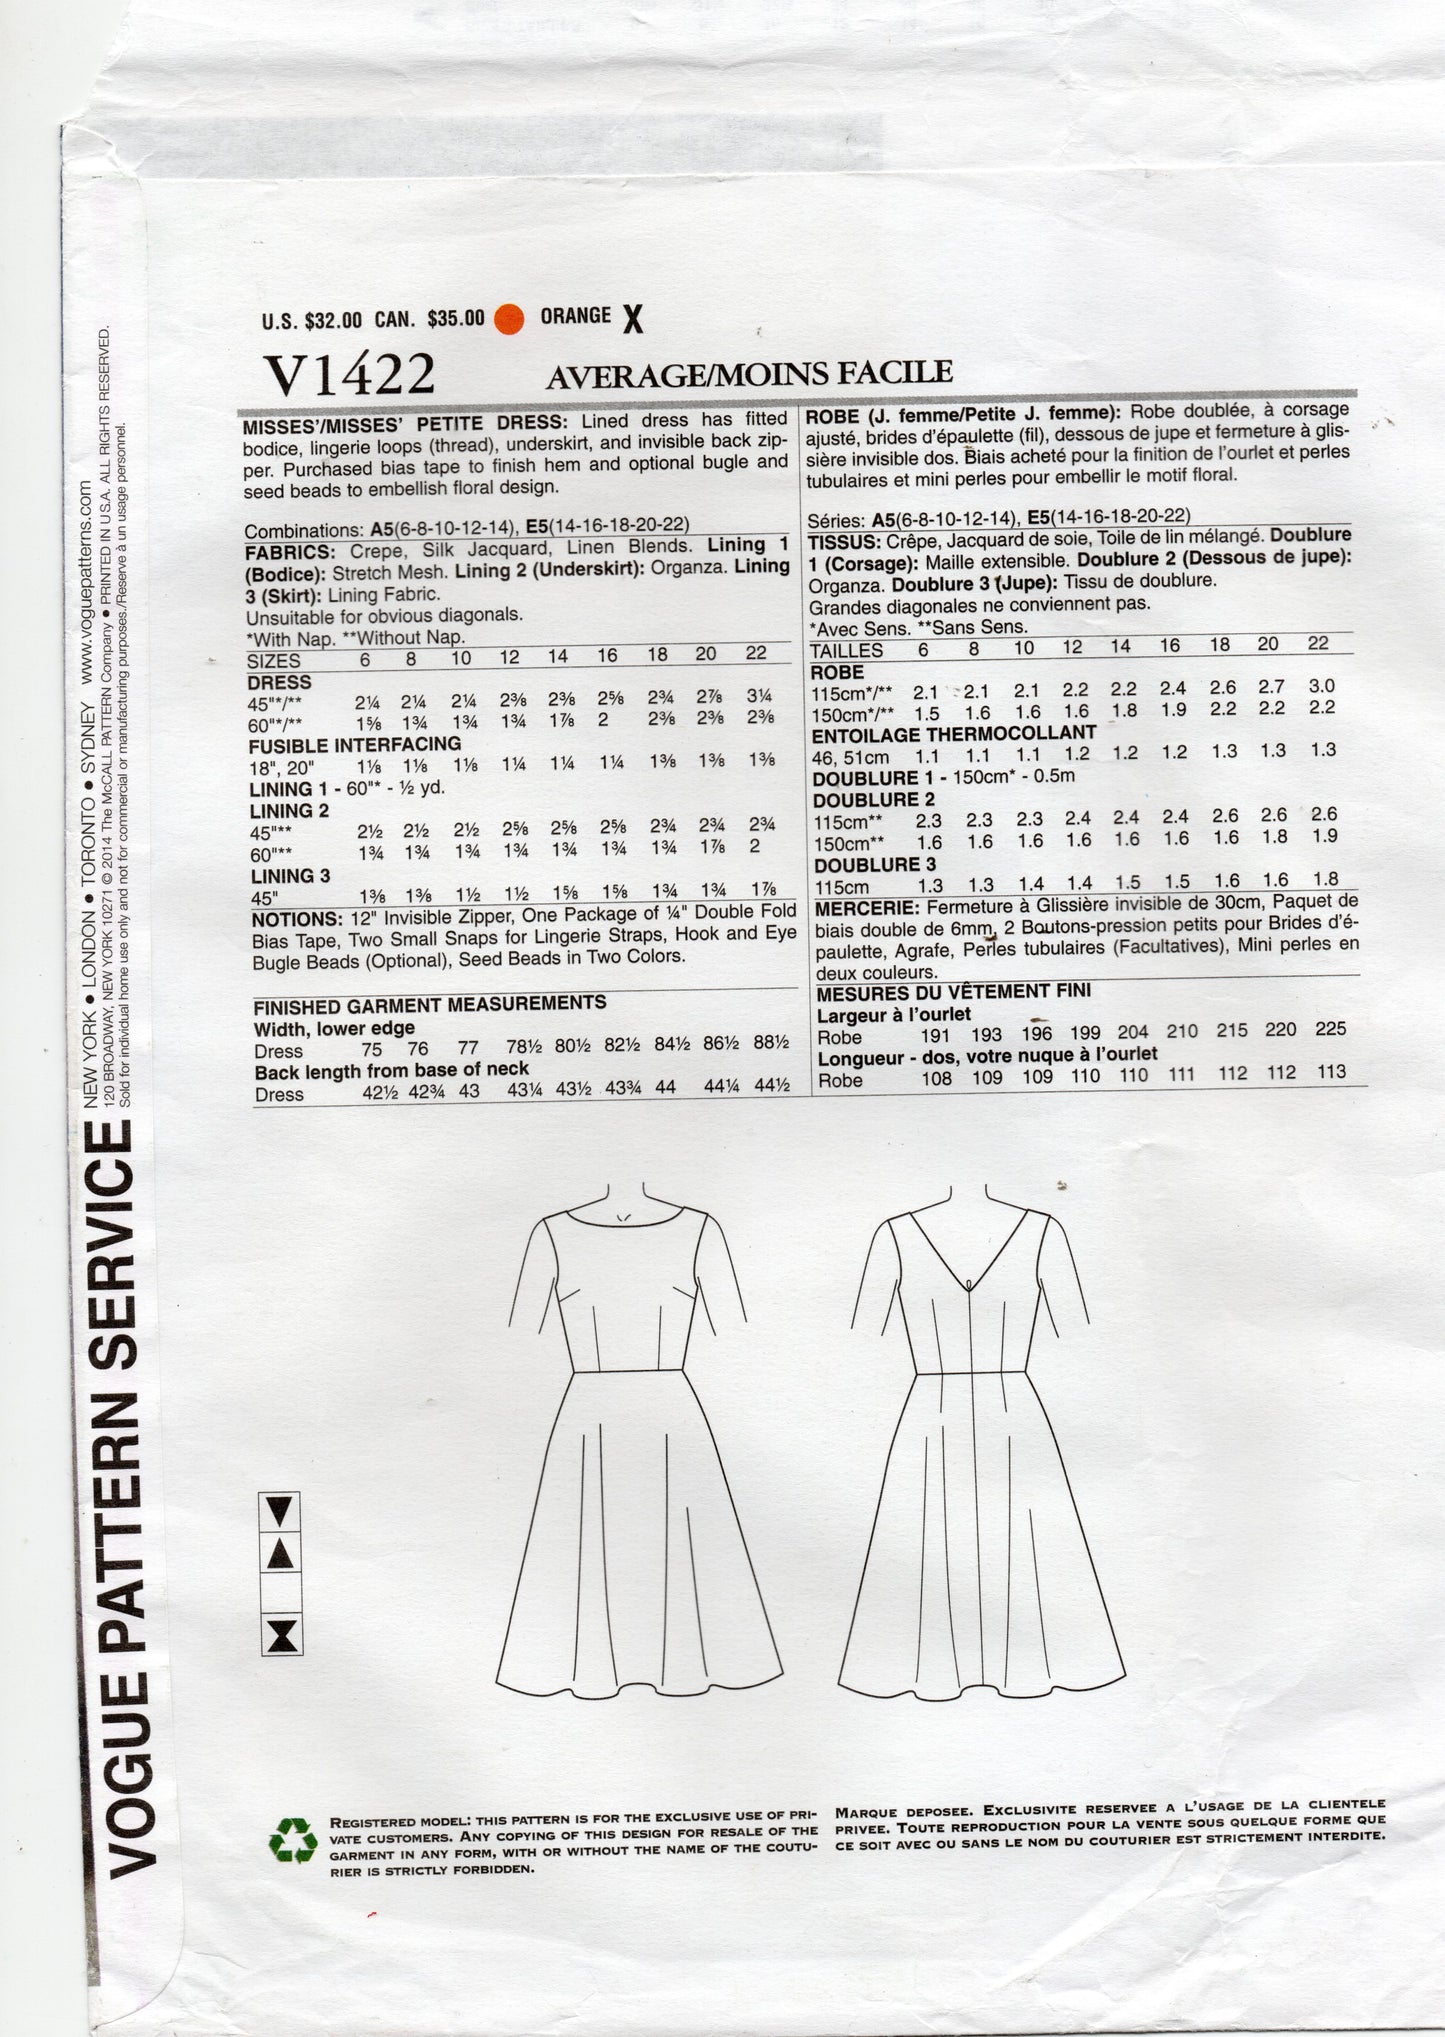 Vogue American Designer 1422 TRACY REESE Womens Lined Dress with Underskirt Out Of Print Sewing Pattern Size 14 - 22 UNCUT Factory Folded